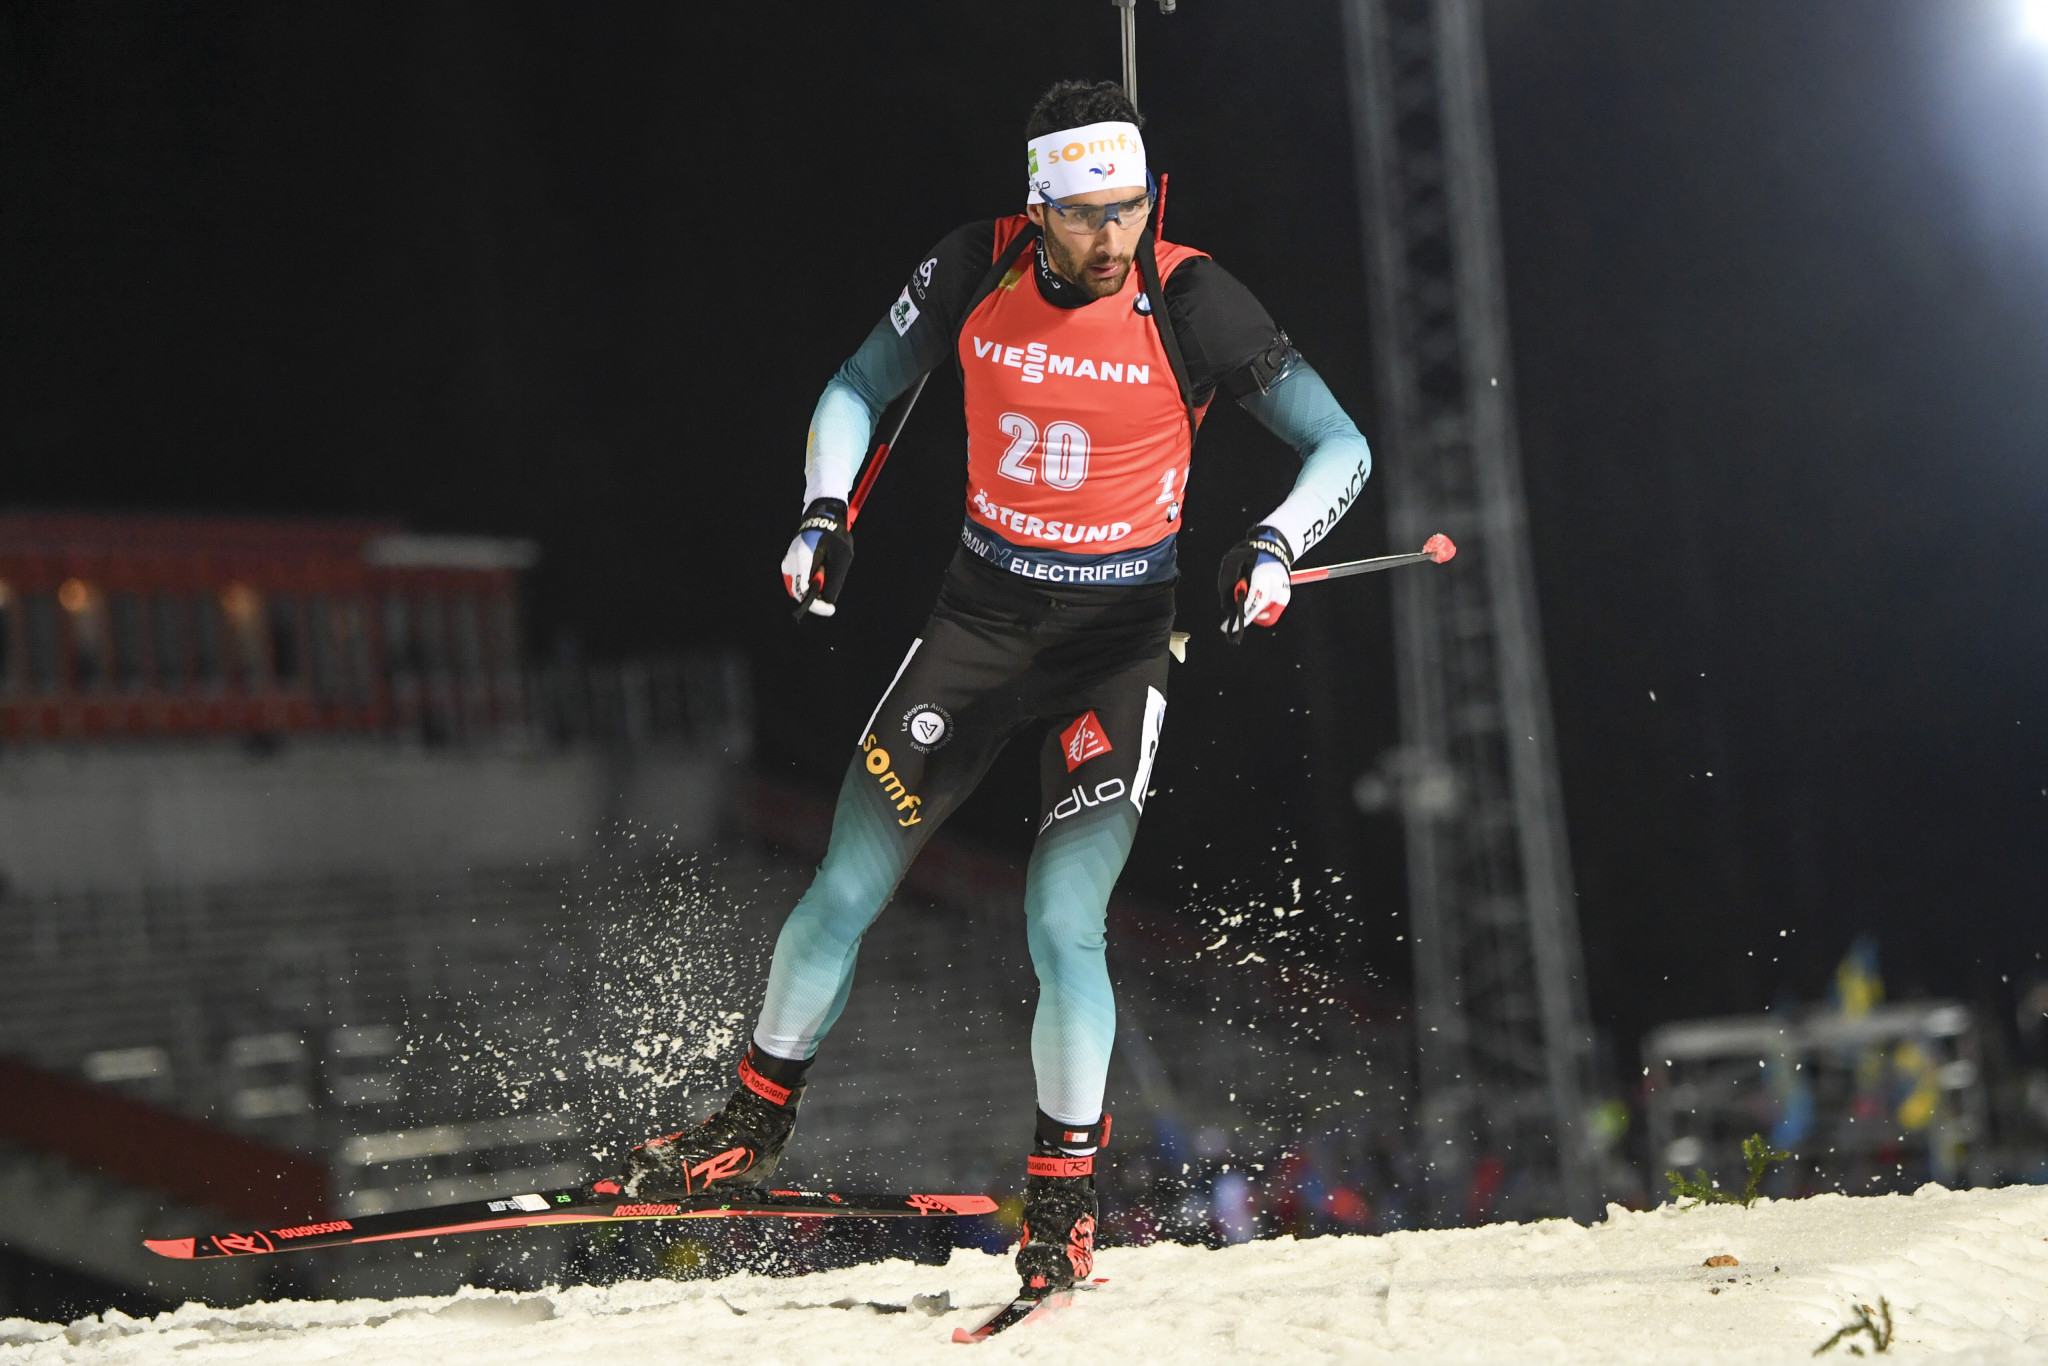 Martin Fourcade will aim to extend his lead in Hochfilzen ©Getty Images